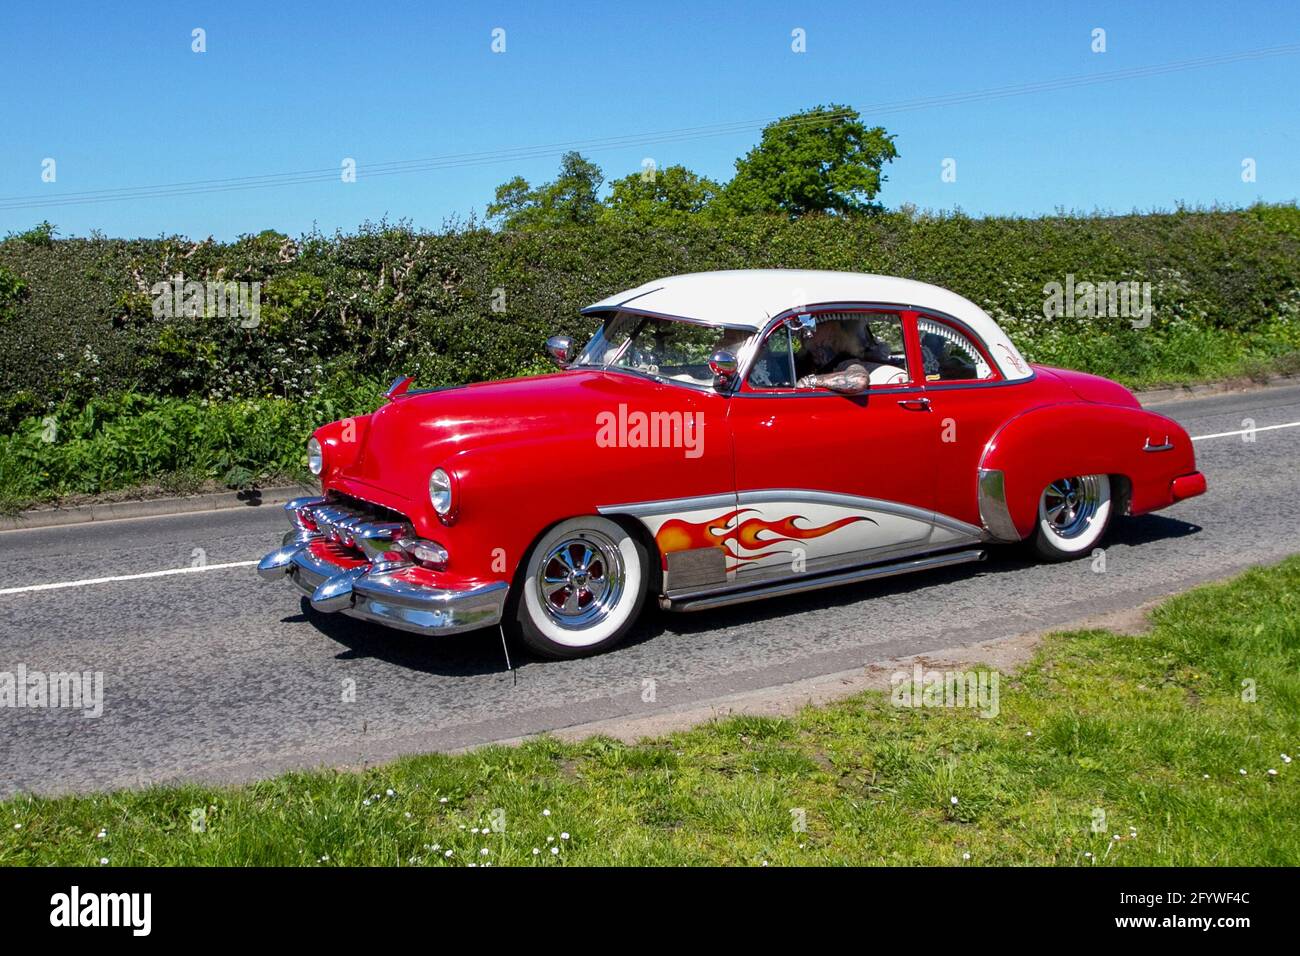 1949 1940s forties red custom Chevrolet American Chevy 3540cc. traffic, moving vehicles, cars, usa vehicle driving, UK roads, motors, motoring, highway road network, en-route to Capesthorne Hall classic May car show, Cheshire, UK Stock Photo